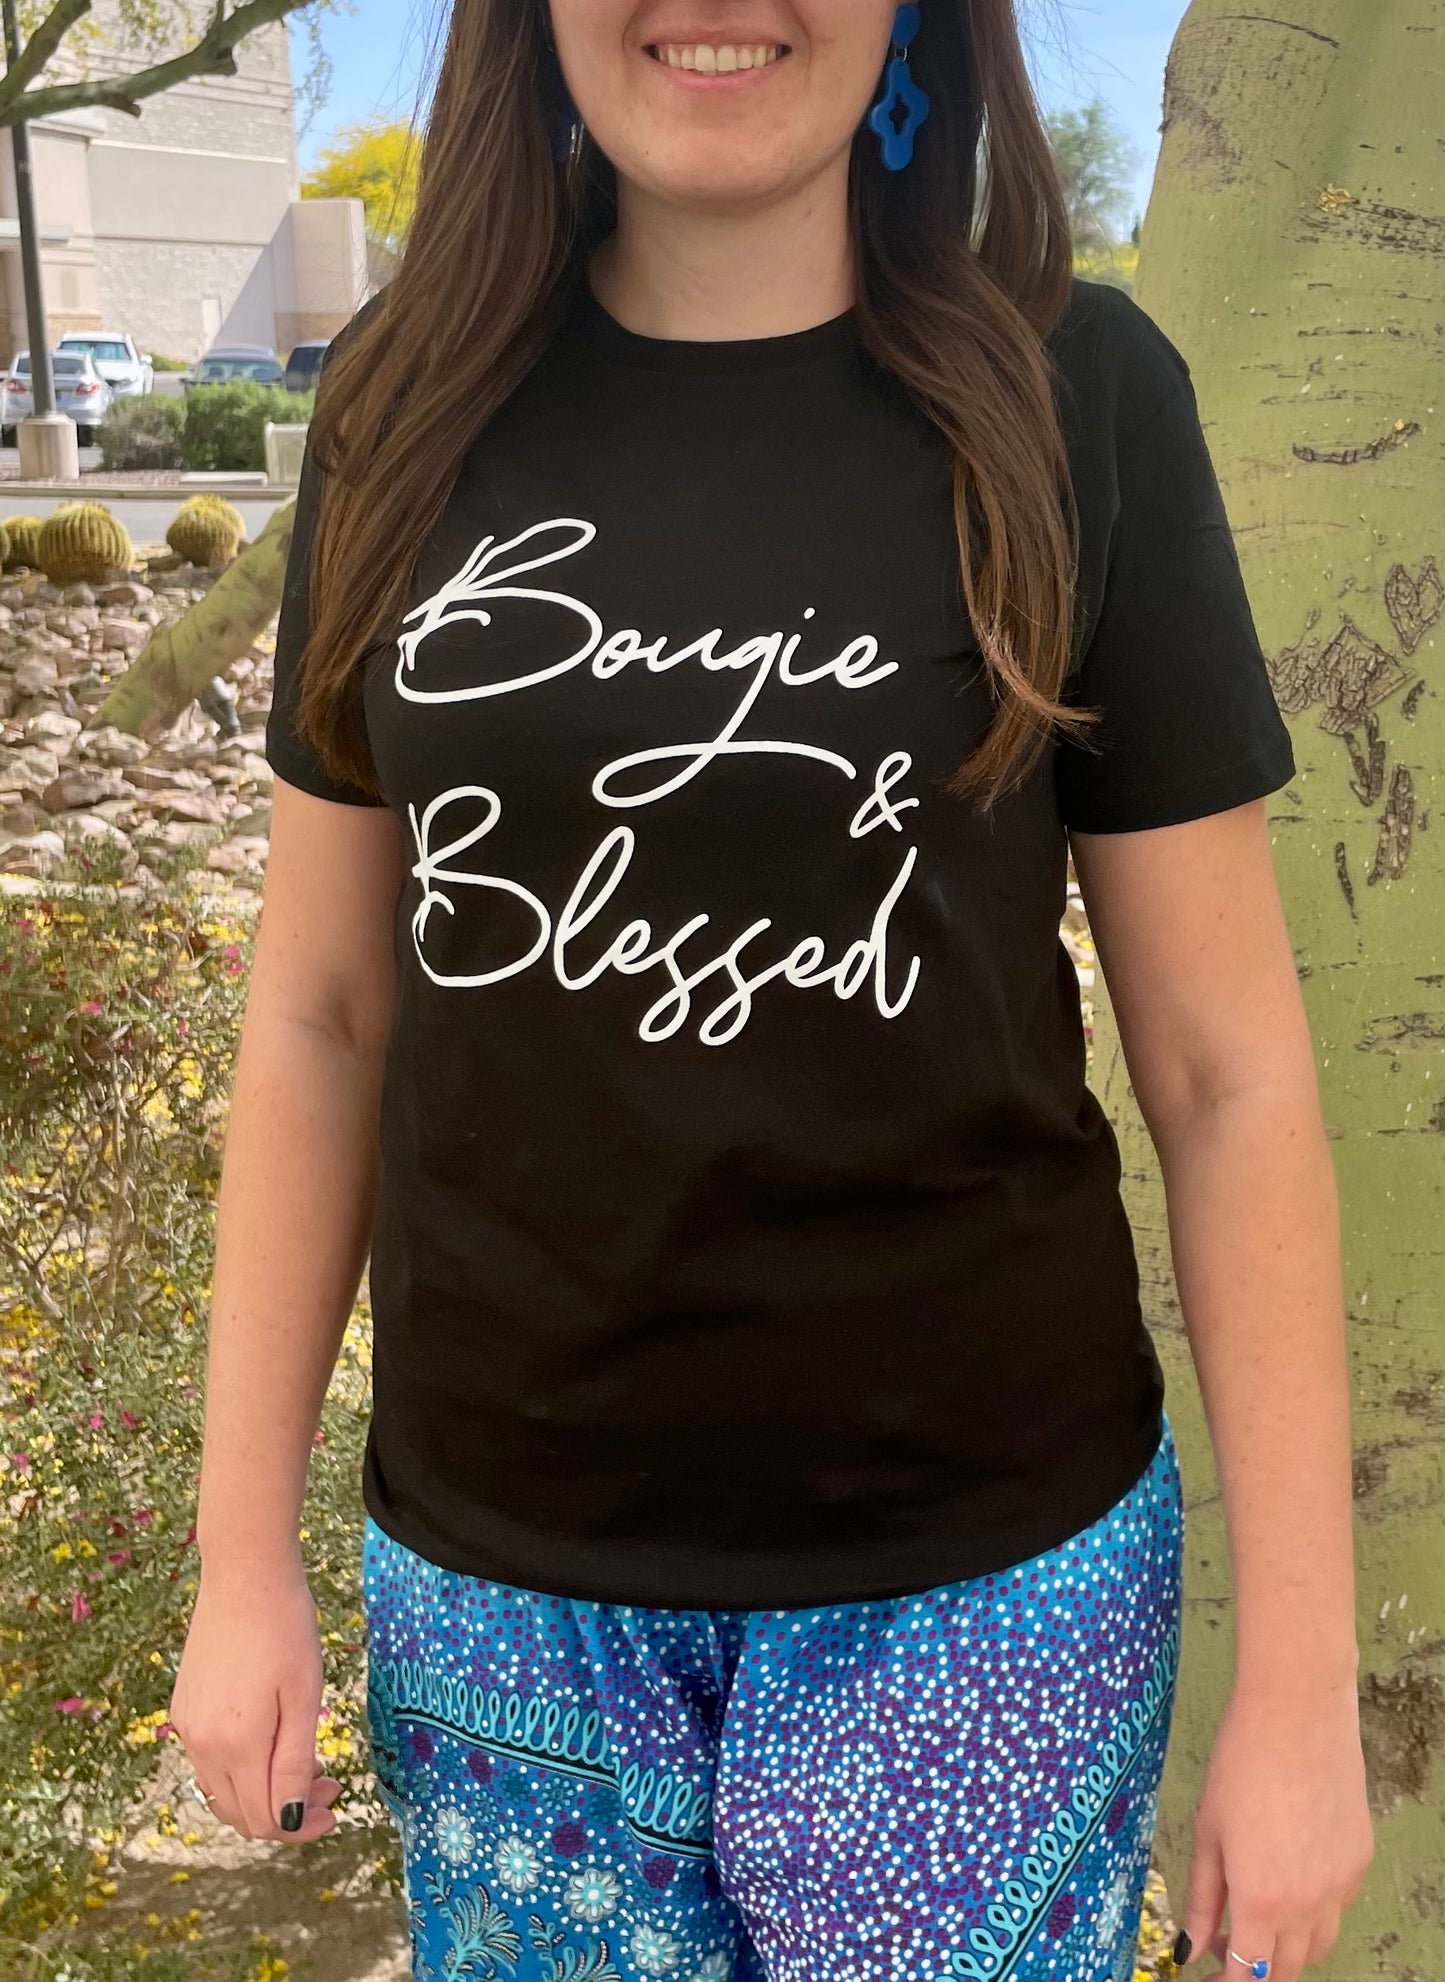 Bougie & Blessed T-Shirt - So Sassy